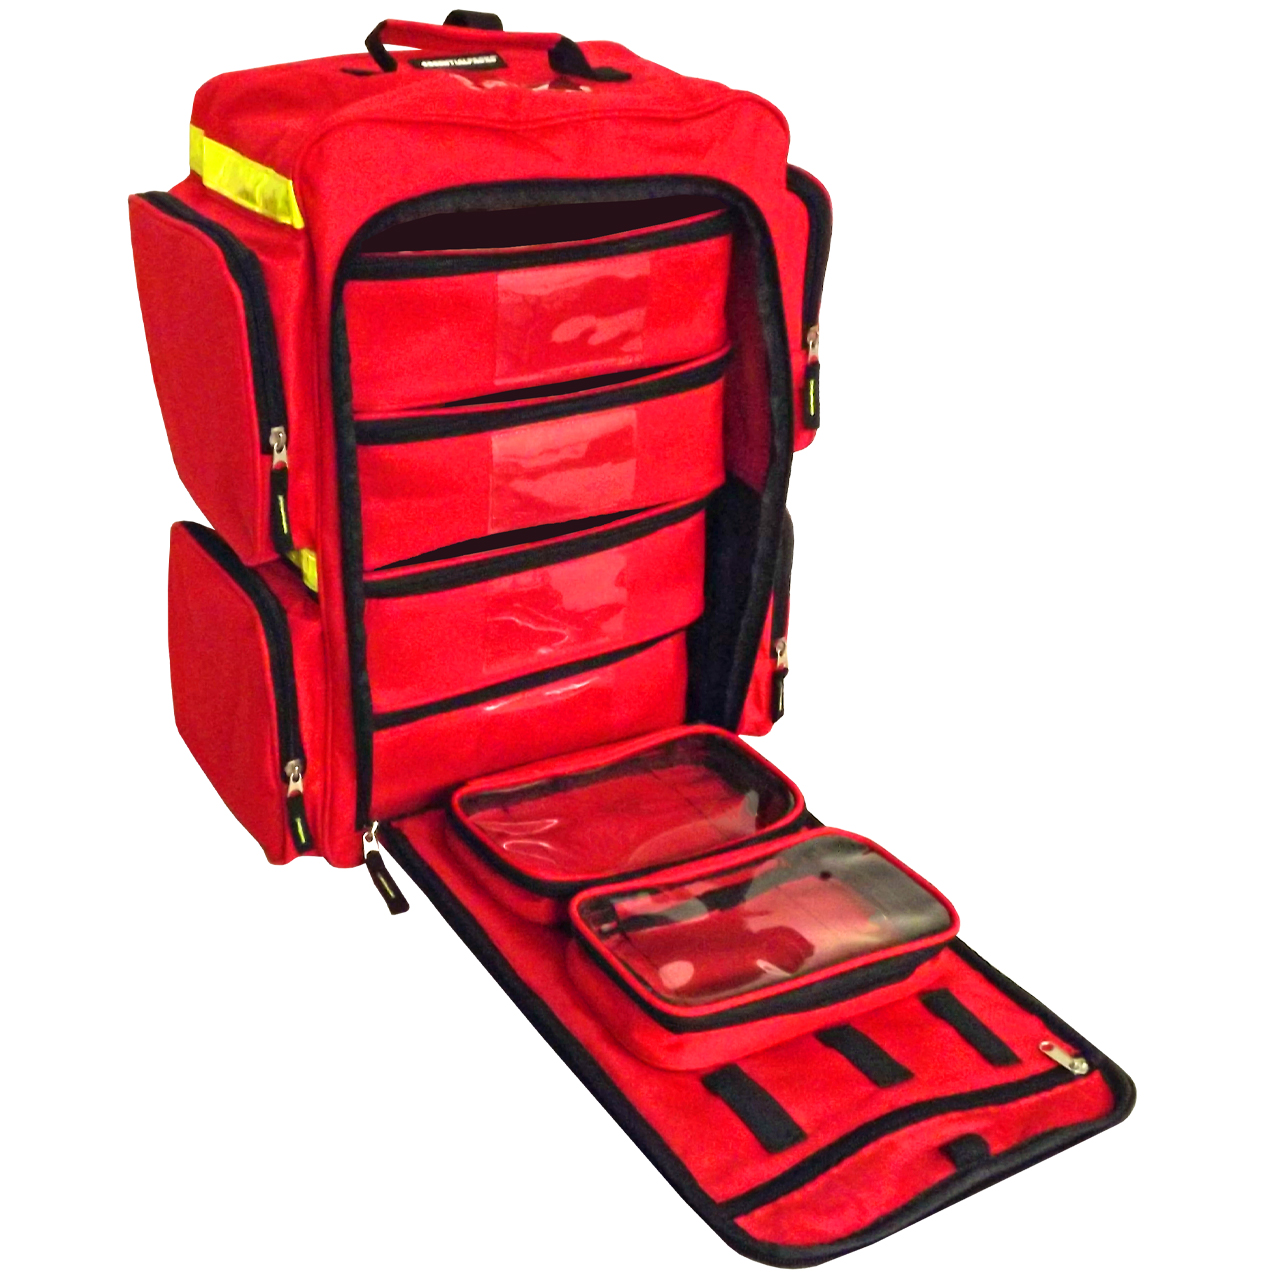 https://cdn11.bigcommerce.com/s-a8bv6/product_images/uploaded_images/flex3-emergency-backpack-red-open-with-pouches.jpg